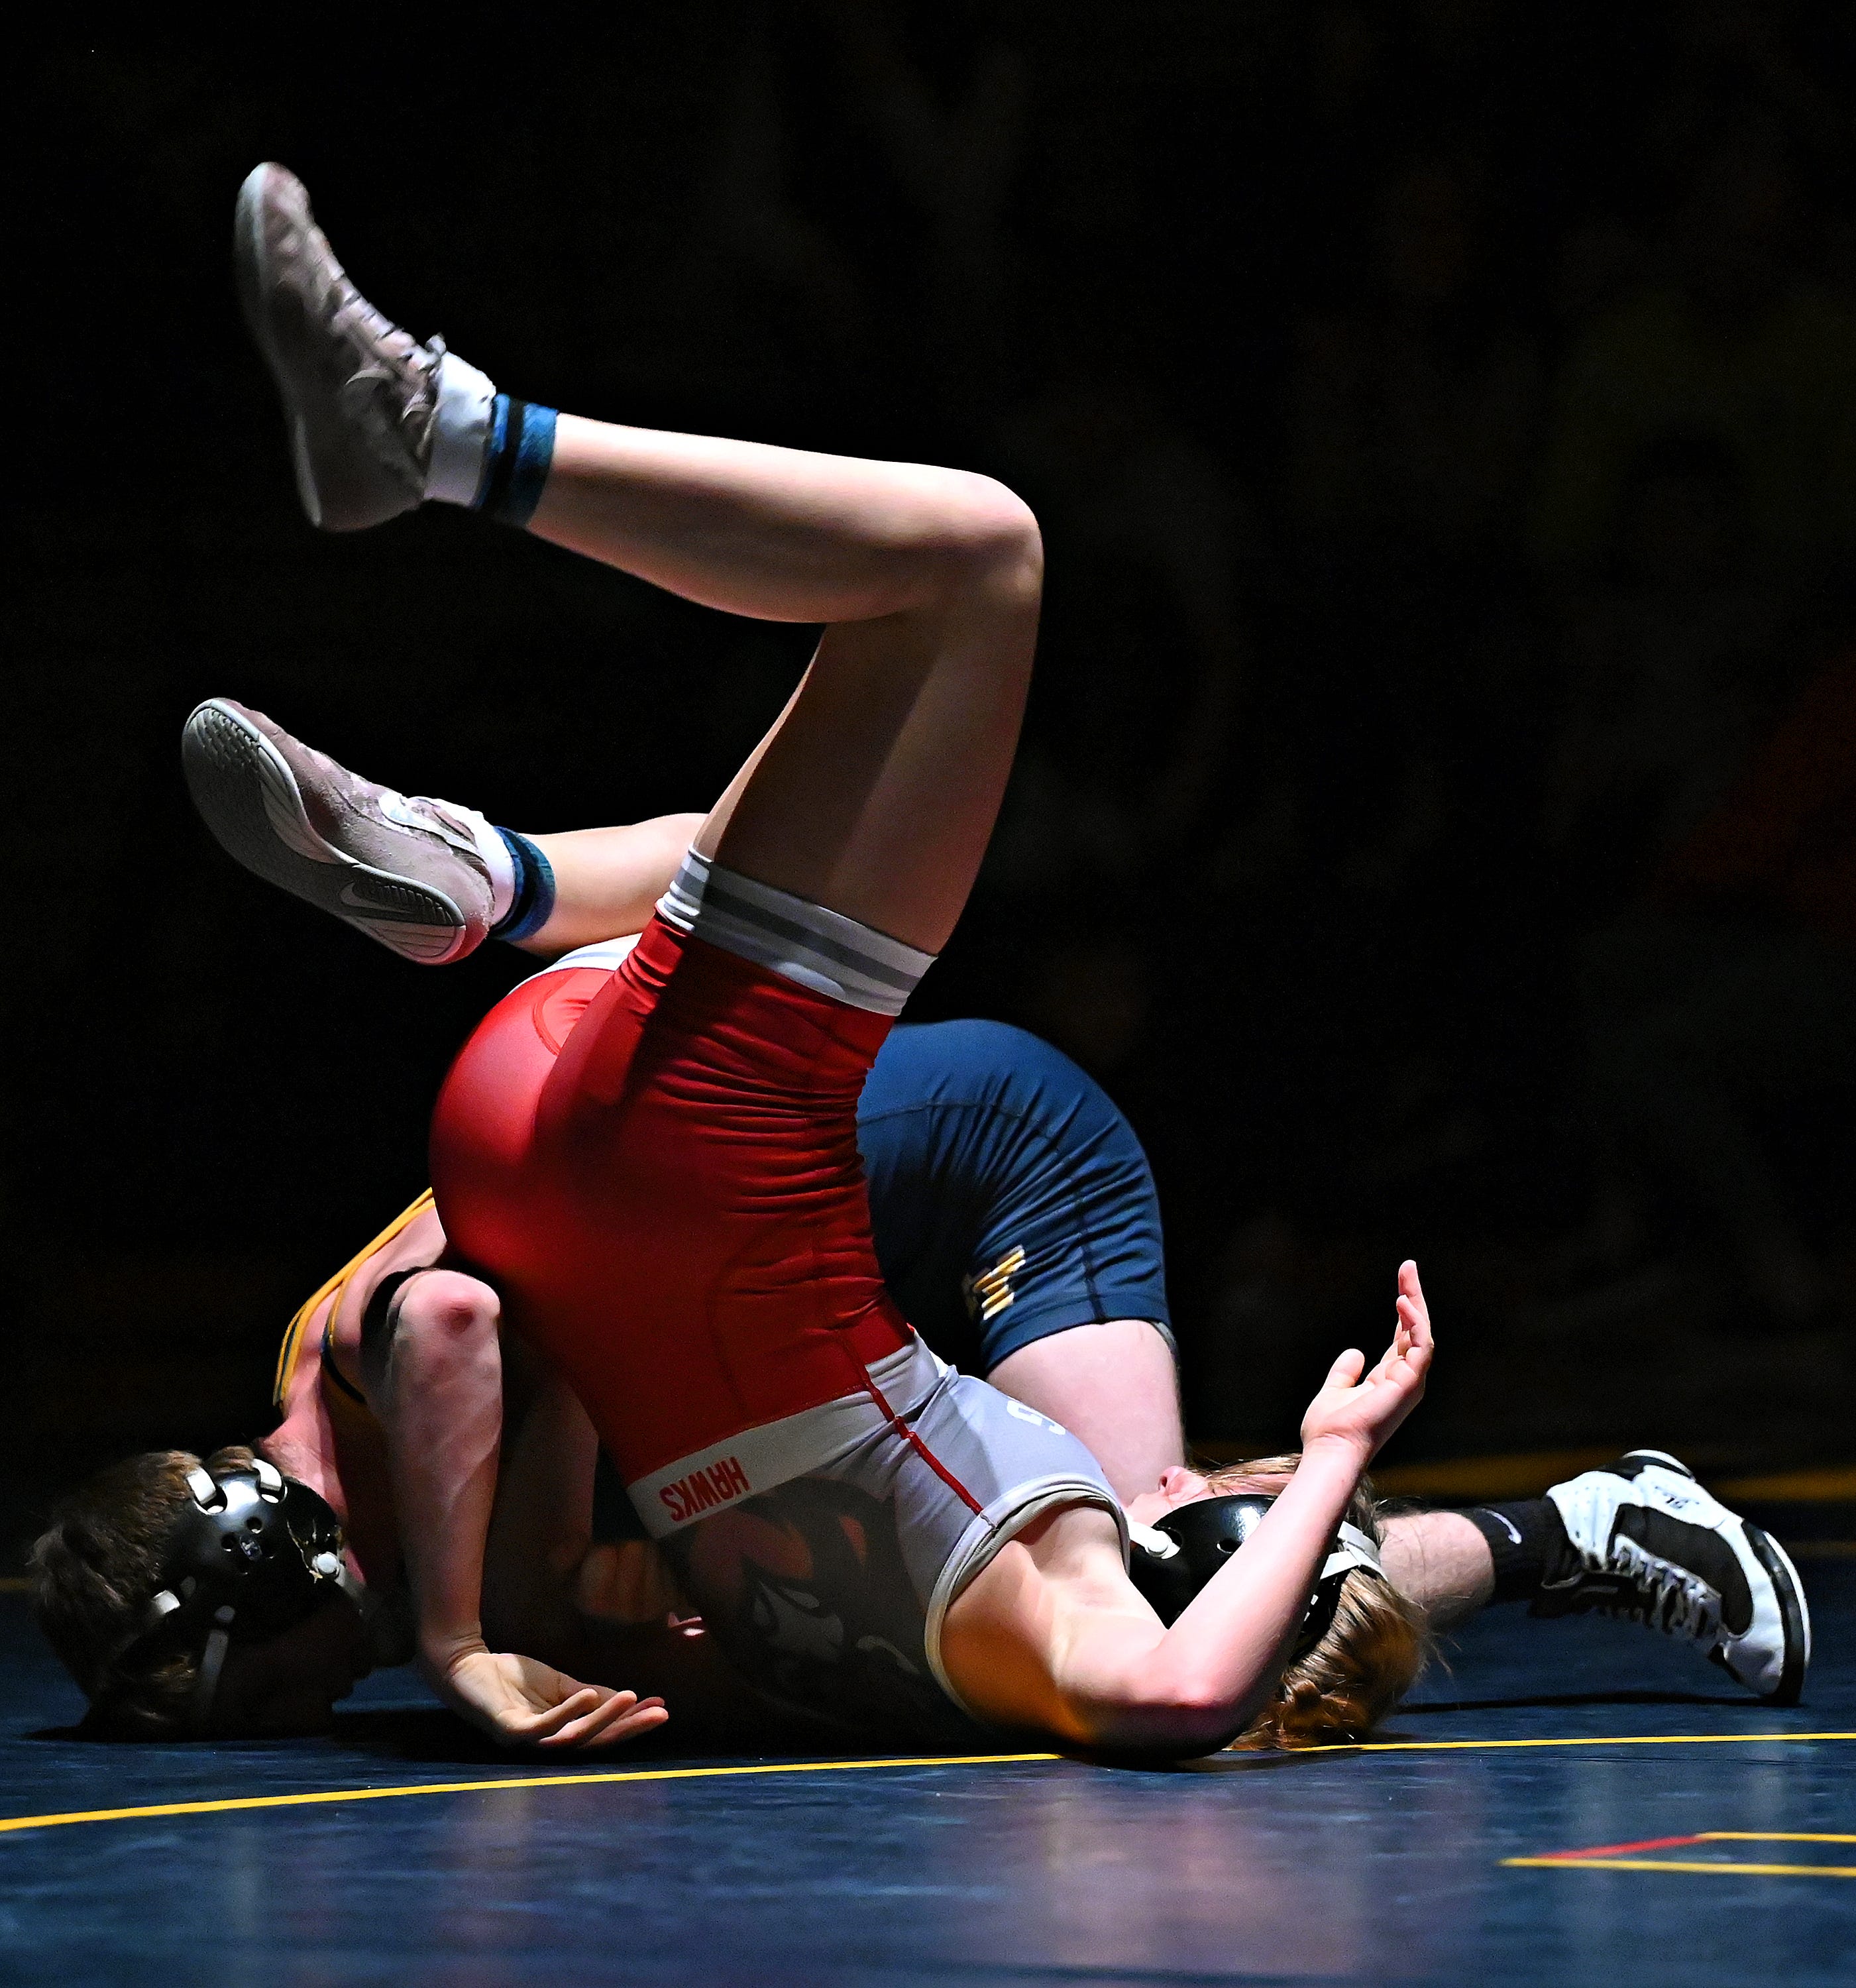 Eastern York’s George Leischner, back, and Hamburg’s Riley Petrie compete in the 127-pound weight class during PIAA District 3, Class 2-A first round wrestling action at Eastern York High School in Lower Windsor Township, Monday, Jan. 30, 2023. Leischner would win with a pin at 1:29 and Eastern York would win the meet 50-22. Dawn J. Sagert photo